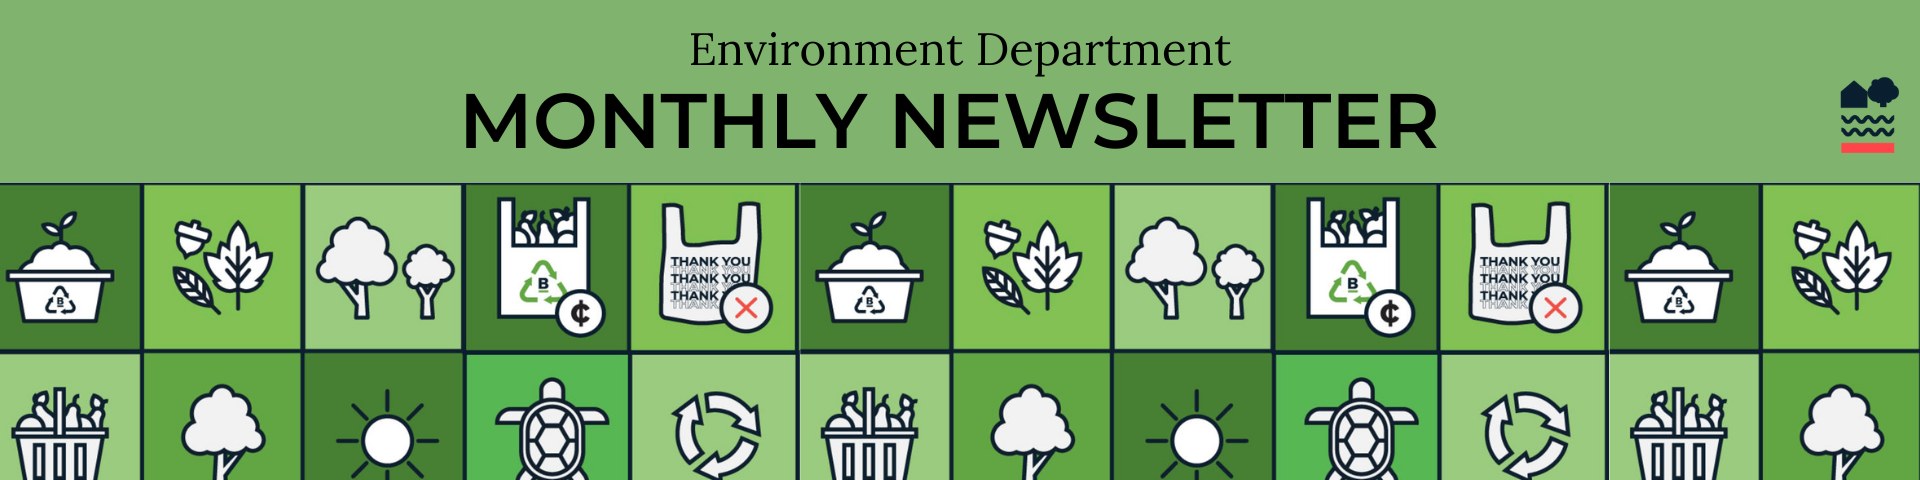 Green header image with different icons such as compost, basket of fruit, tree, leaves. Across the center top reads Environment Department Monthly newsletter and fireworks.